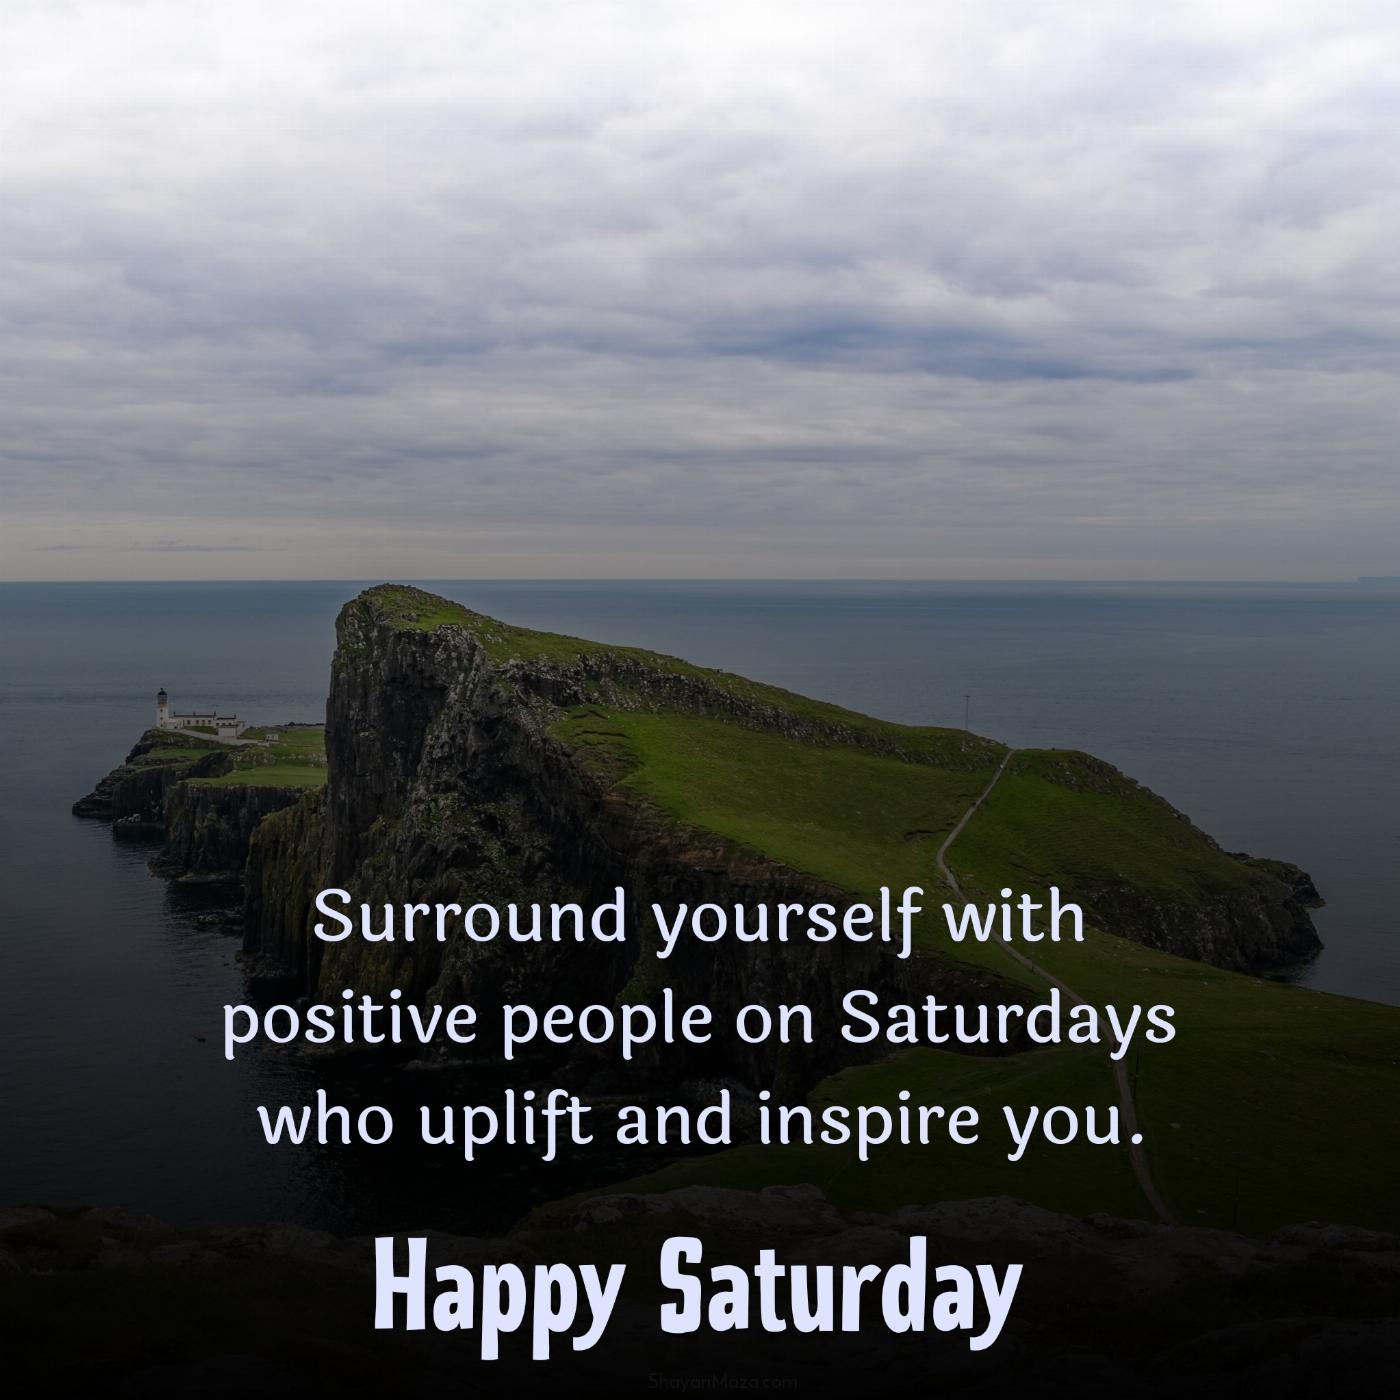 Surround yourself with positive people on Saturdays